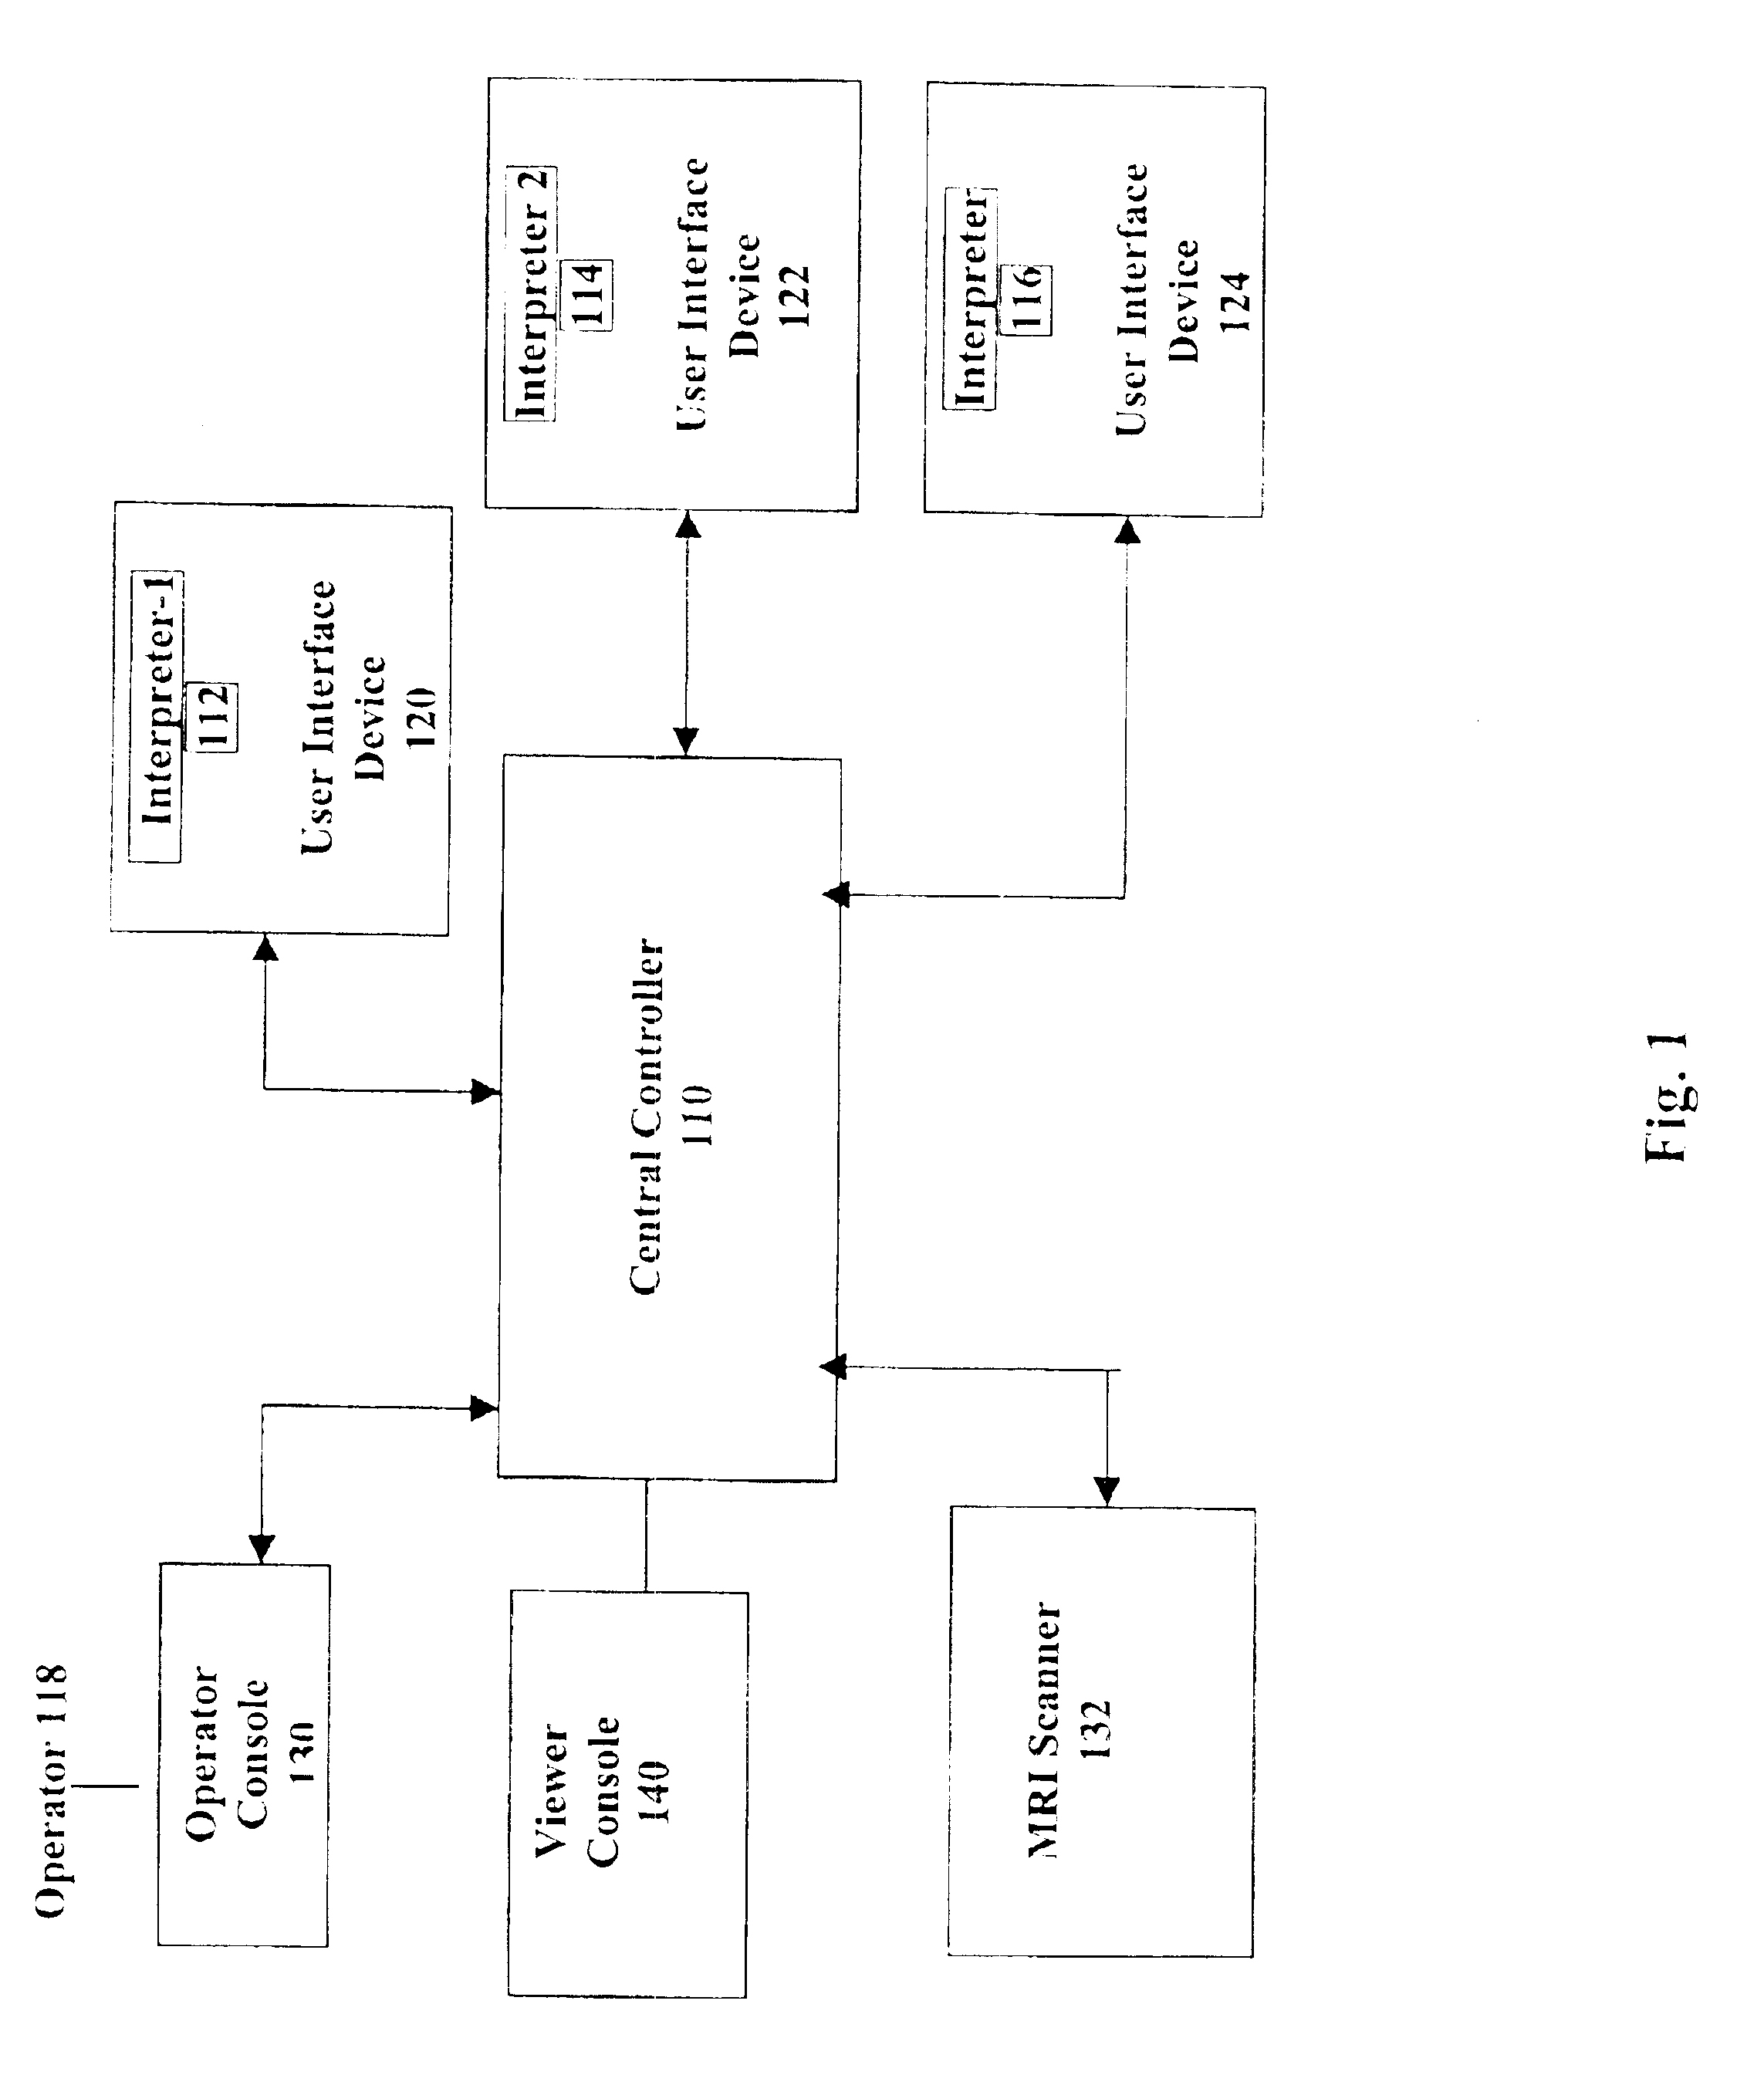 System and method for providing information for detected pathological findings